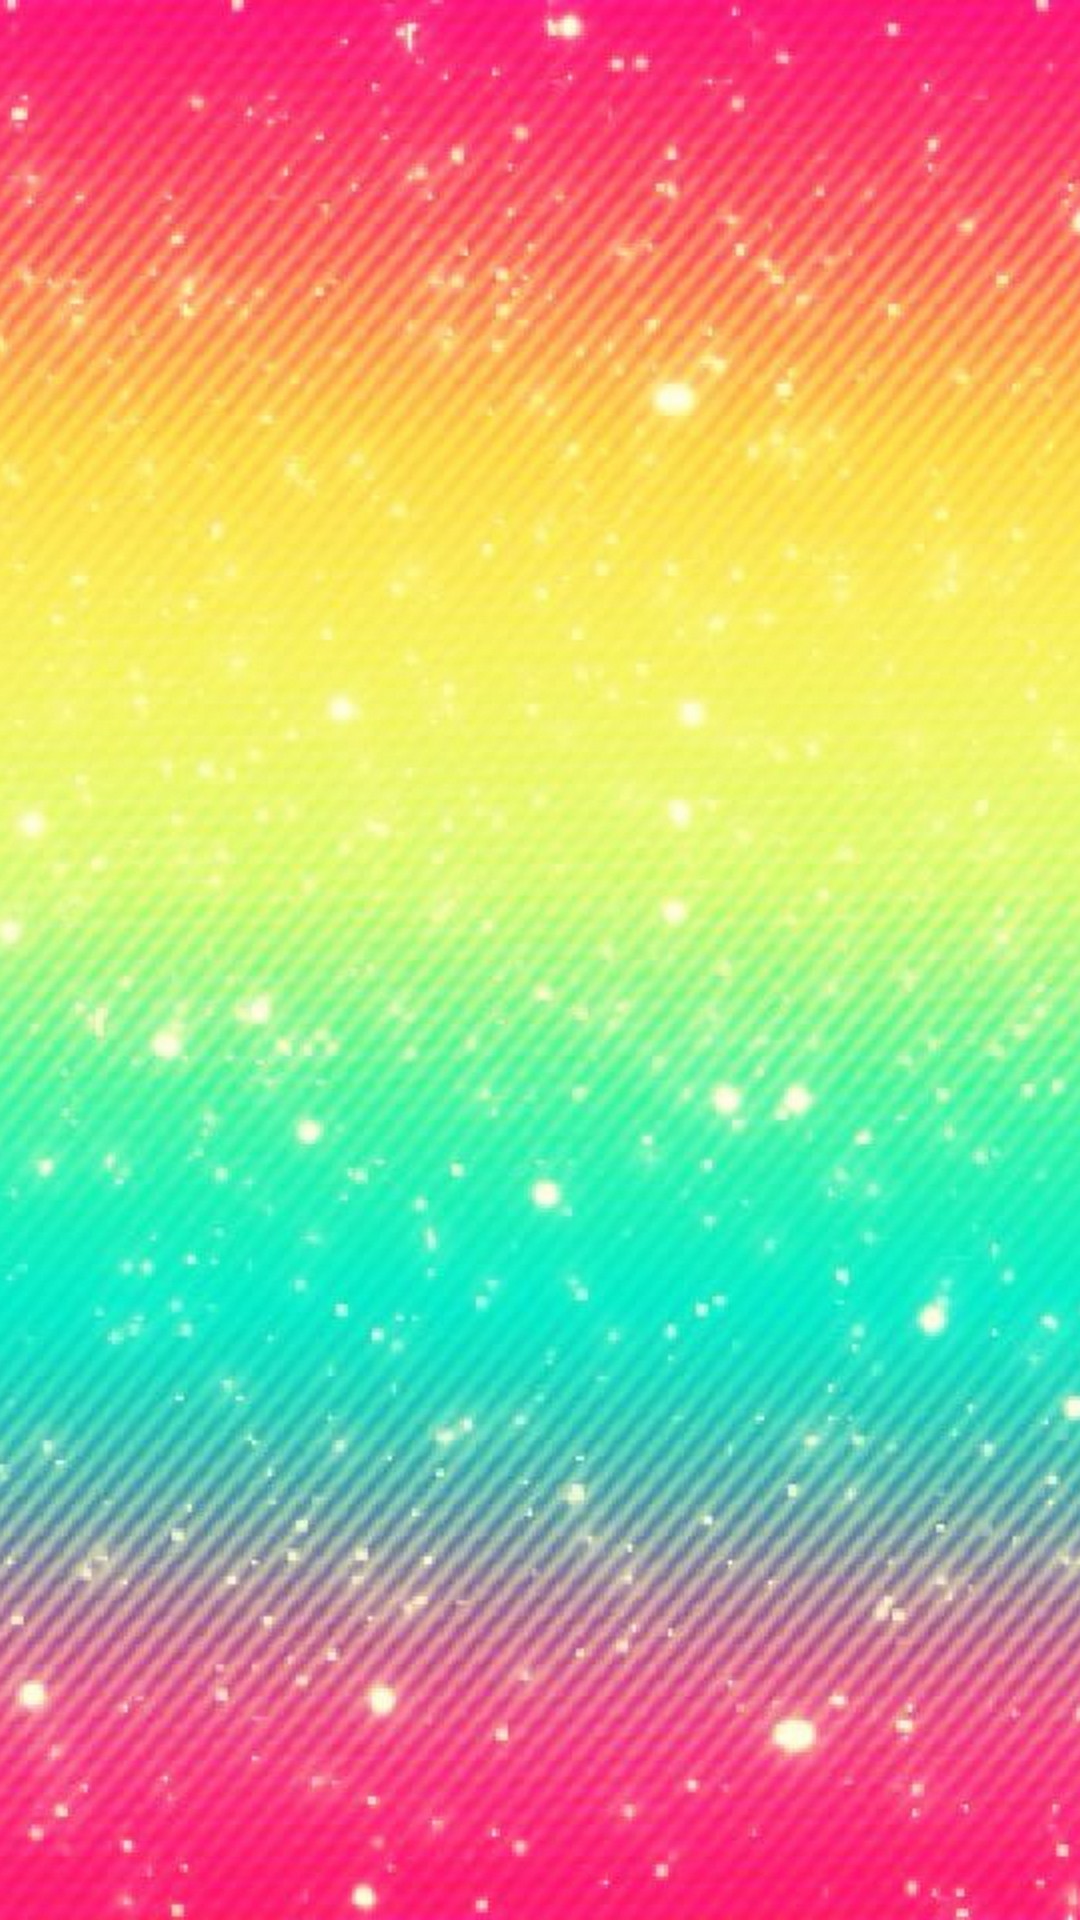 Rainbow Wallpaper Cute Girly For Android 1080x1920